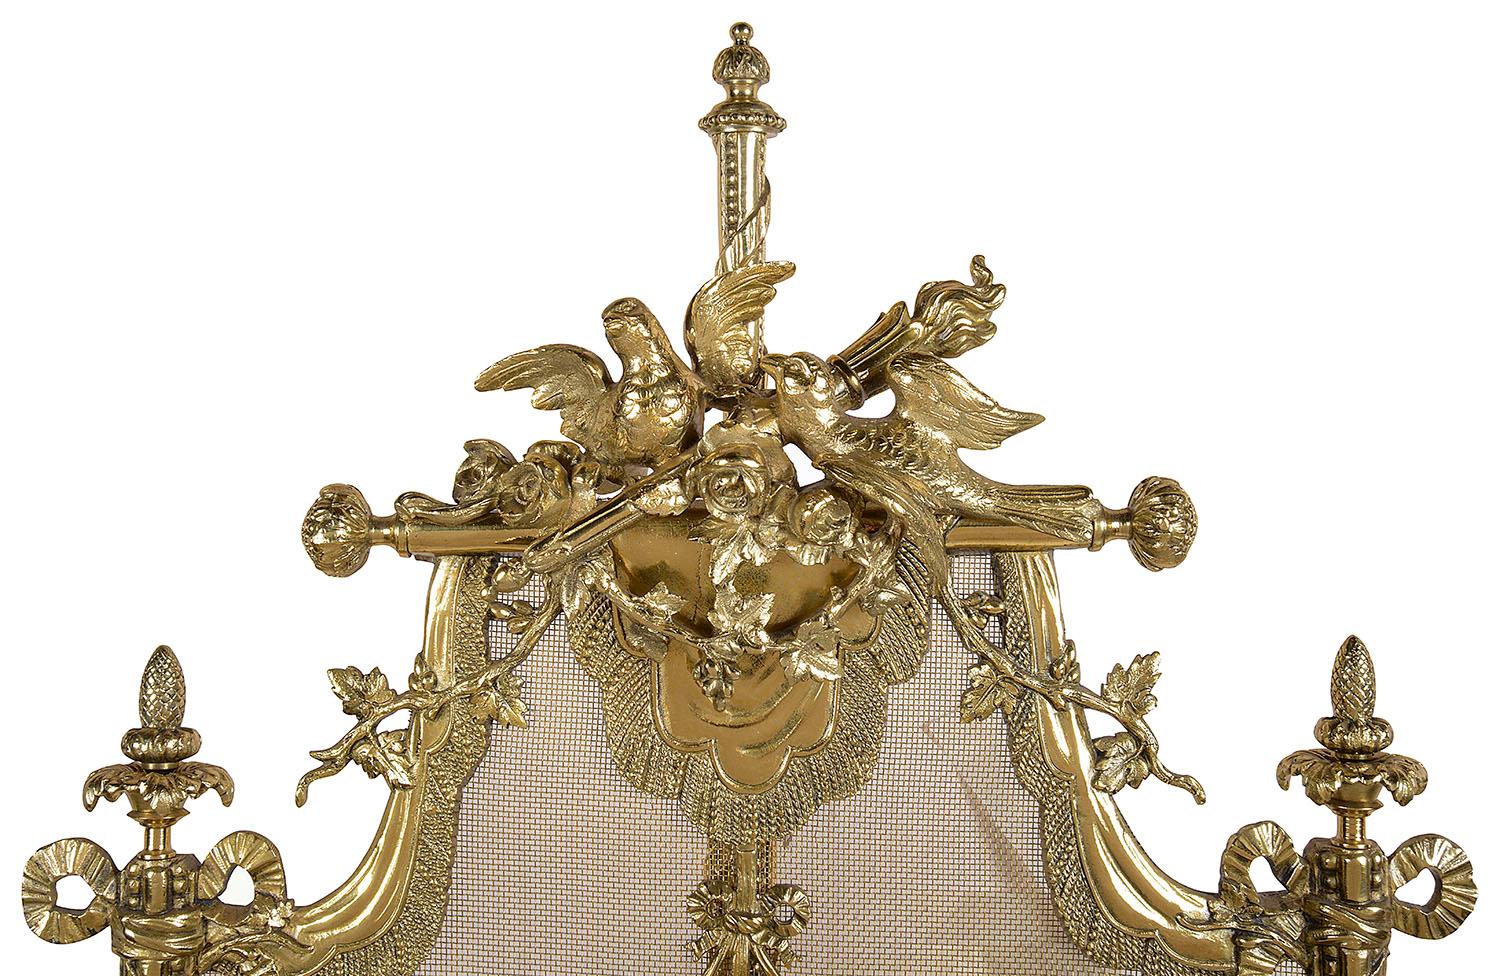 A very good quality late 19th century French, Louis XVI style gilded ormolu fire screen, having a pair of doves either side of a flaming torch, scrolling vine leaves, ribbons and a urn with rams heads, raised on four out splayed legs.